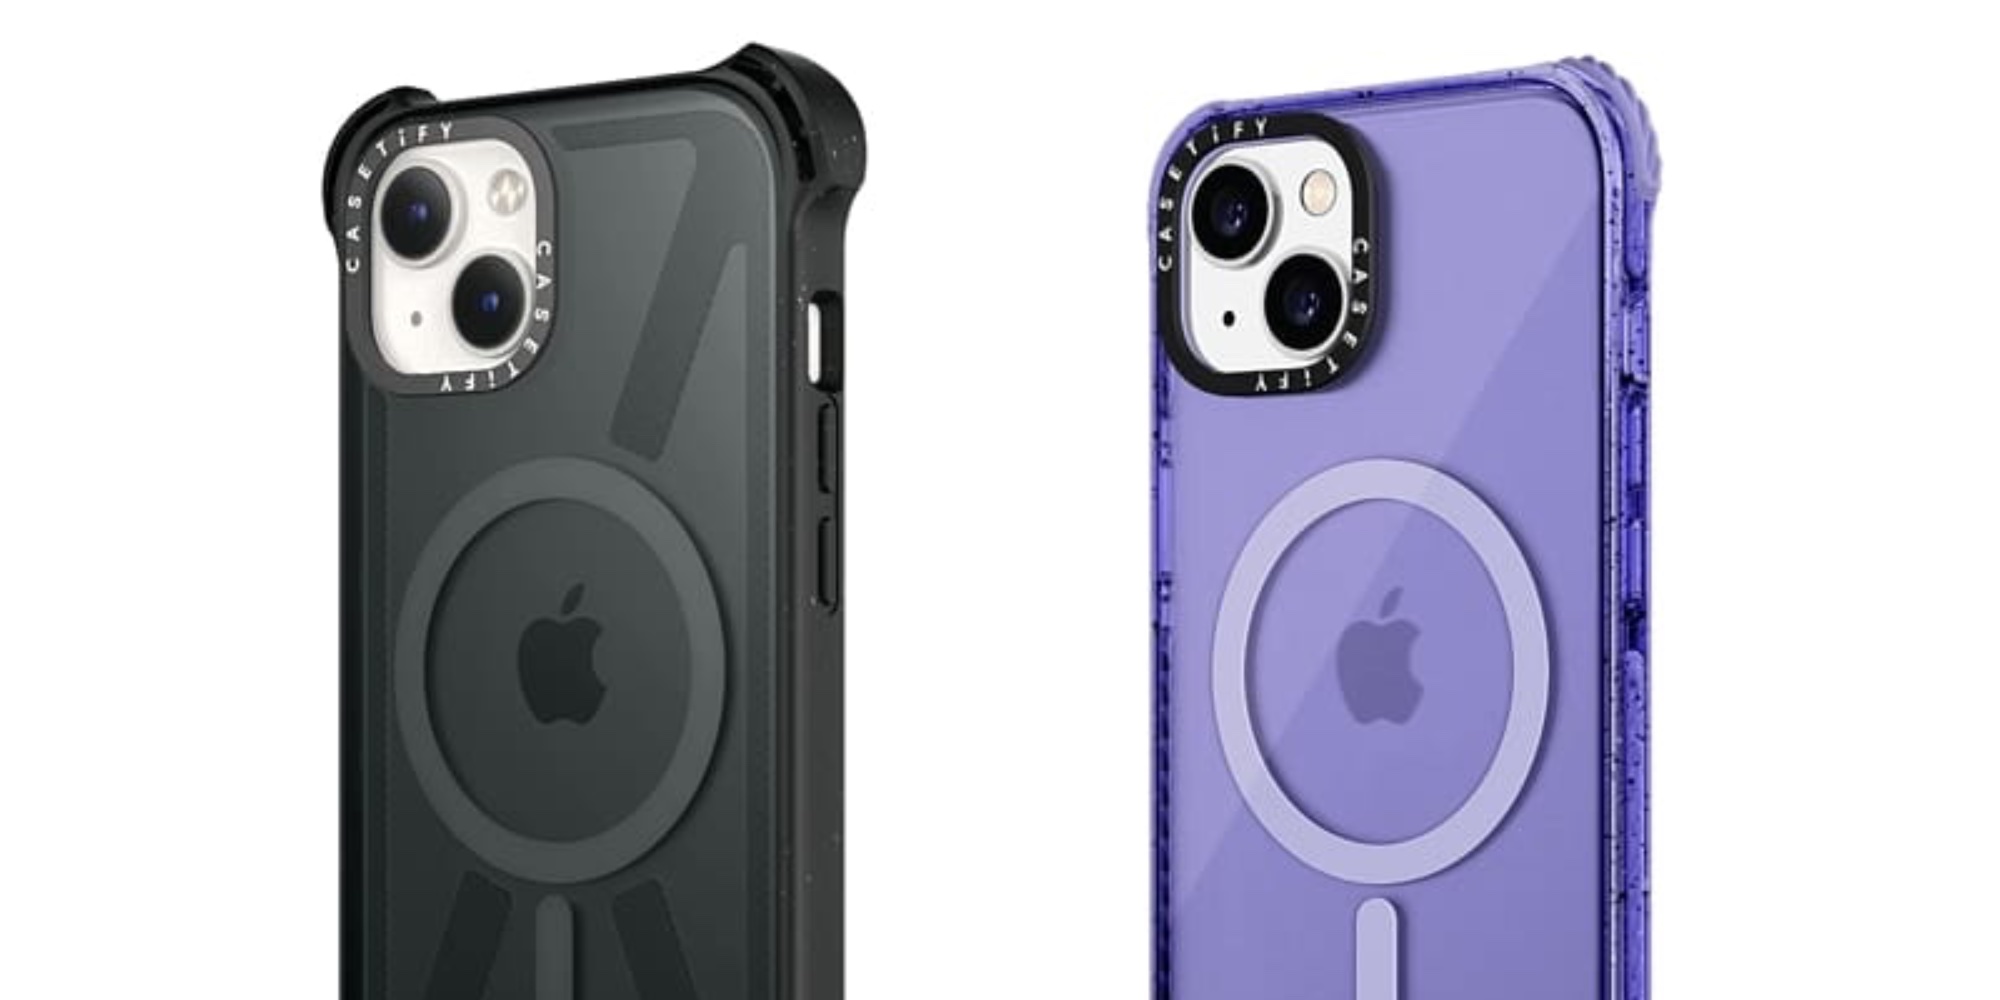 CASETiFY iPhone 14 case collection arrives with new styles